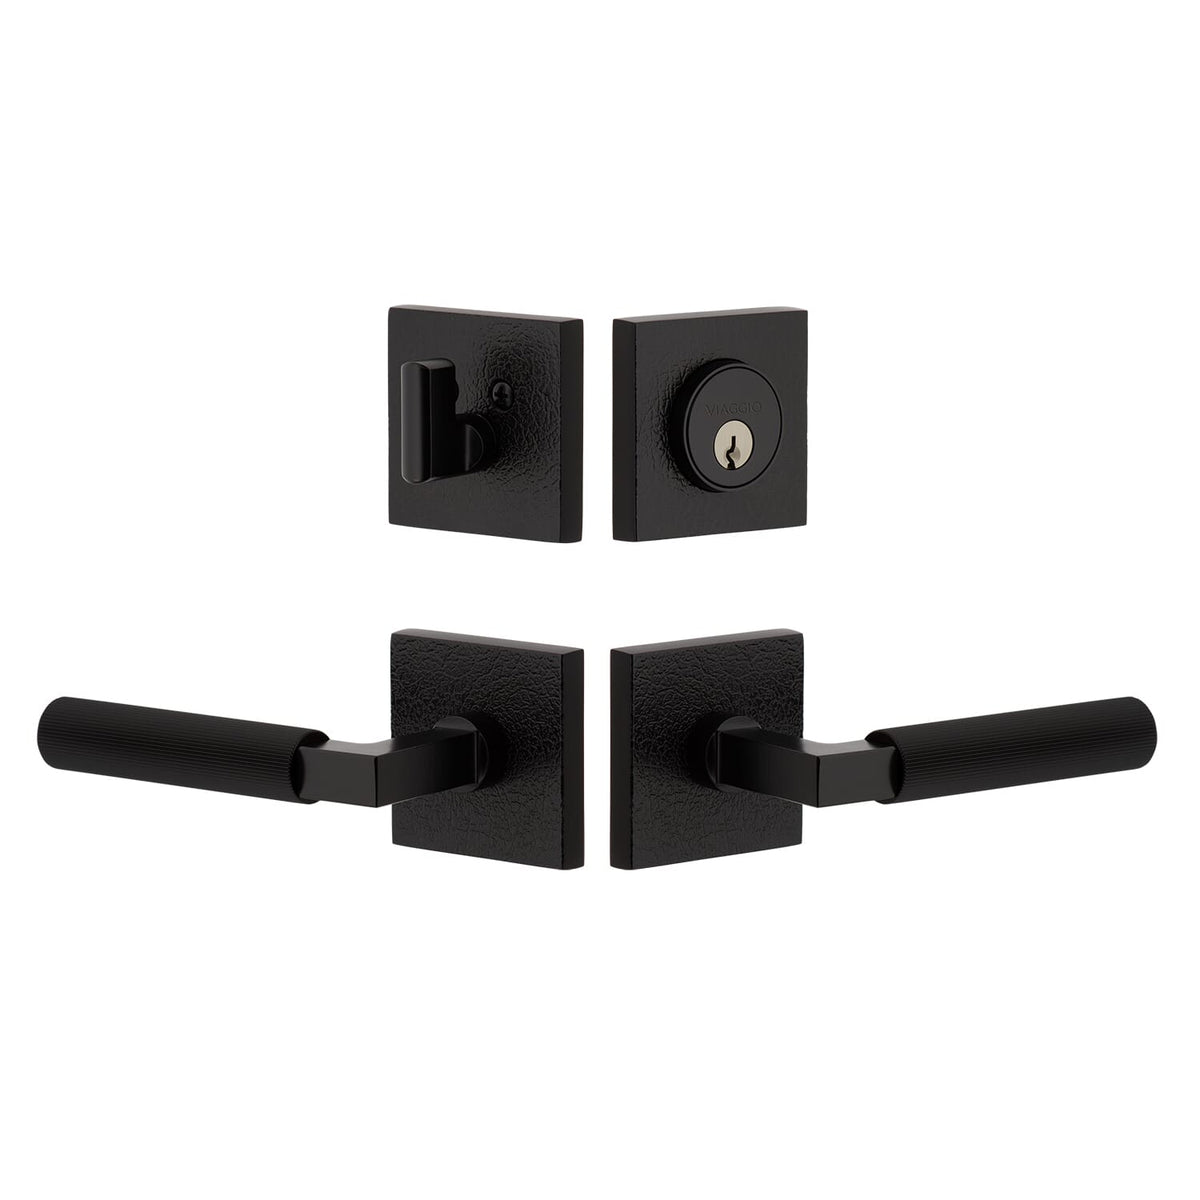 Quadrato Leather Rosette Entry Set with Contempo Fluted Lever  in Satin Black